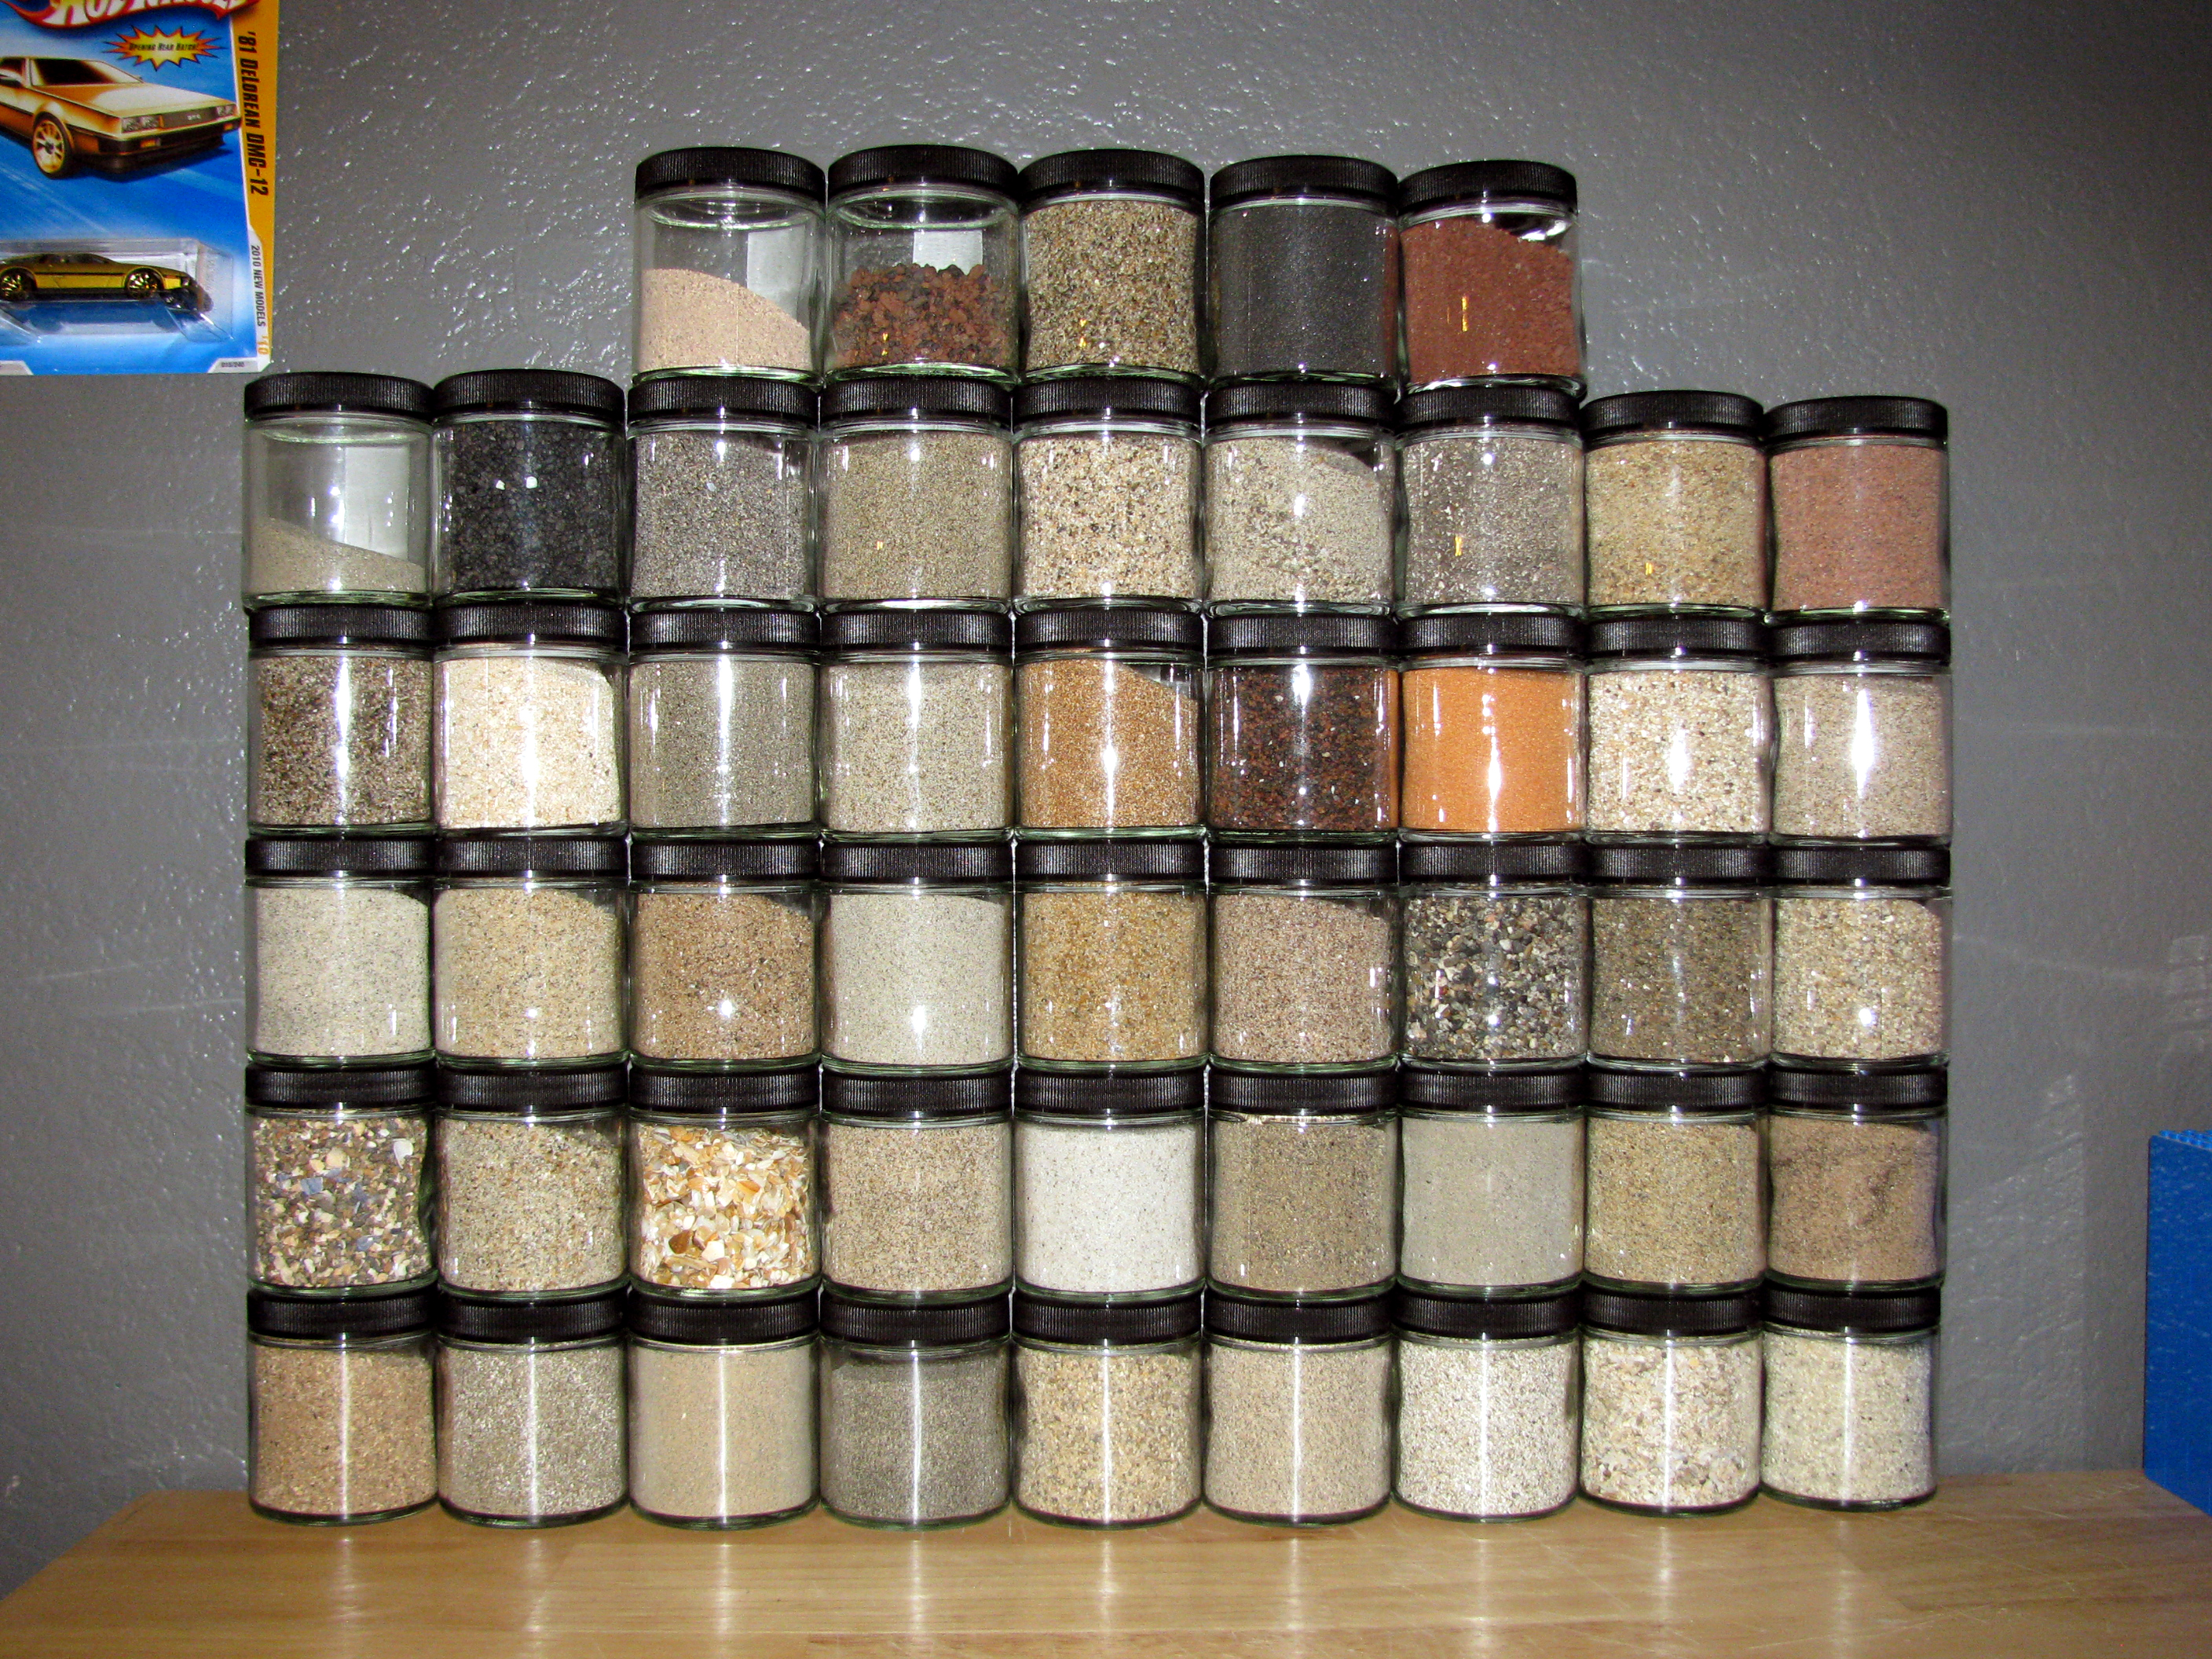 Sand Collection as of 18 July 2010